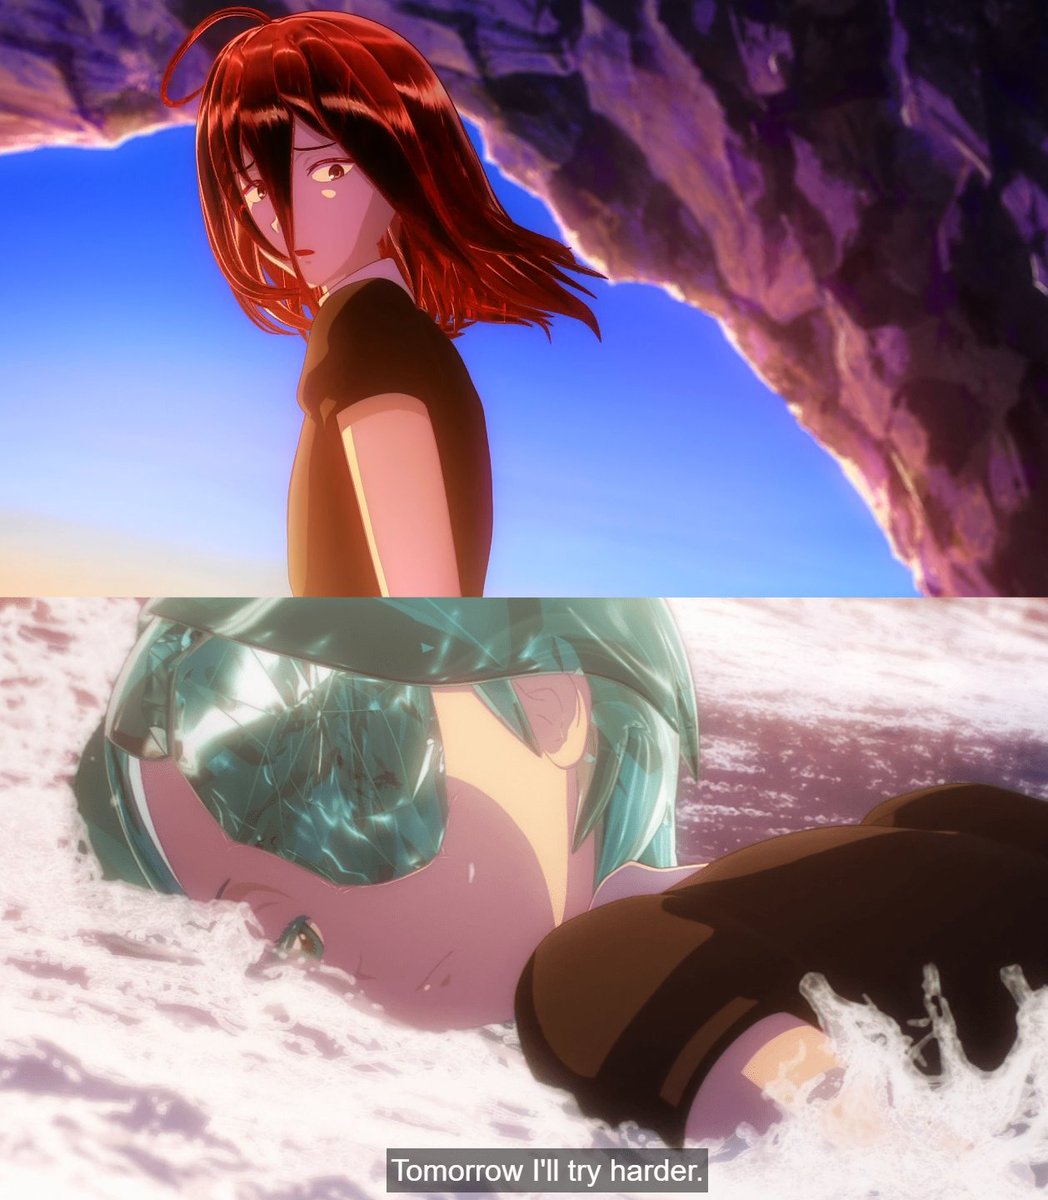 manga and anime scenes for comparison!!! ?vol 2 rly showed how earnest and selfless phos used to be and i love that. they riskily ventured into the sea to find a solution for shinsha and prioritized their wellbeing before their own without hesitation.....tears up a little.. 